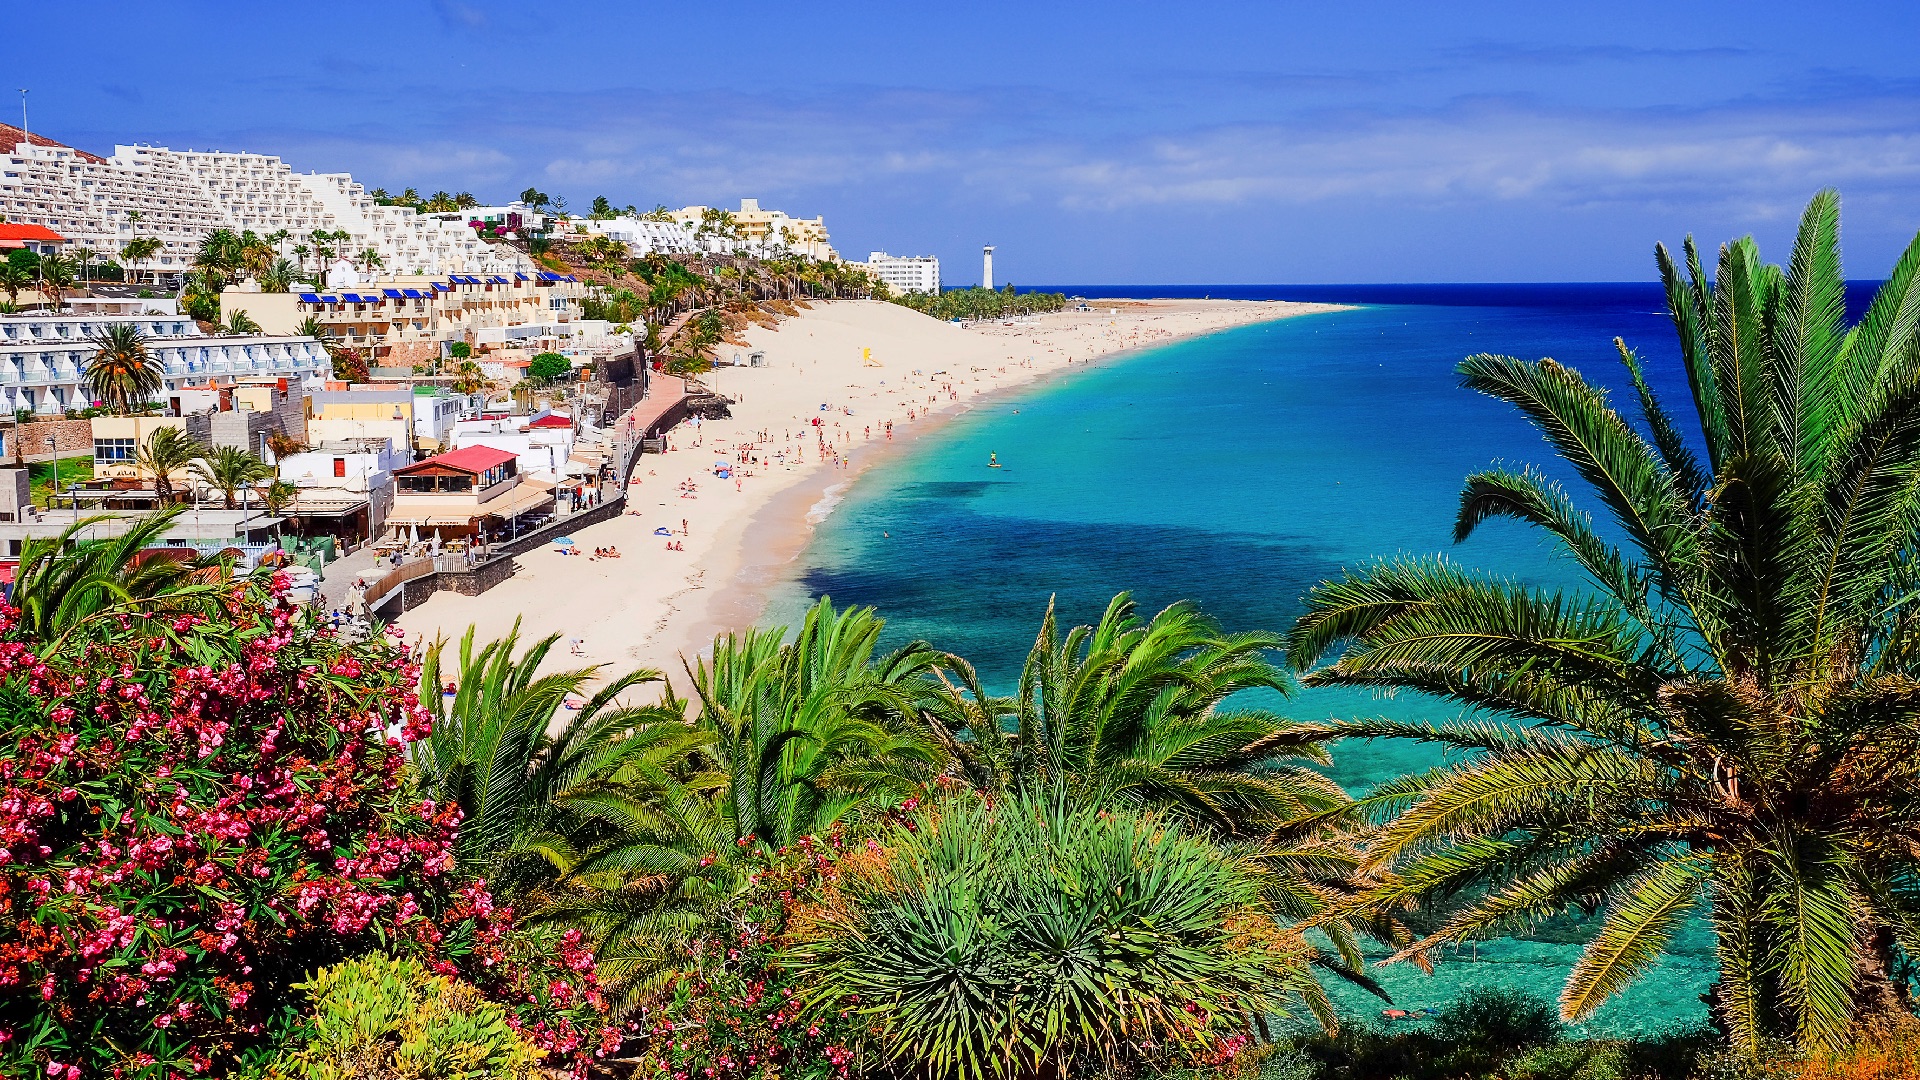 You are currently viewing 2021! Cheap flights from France to Fuerteventura (Canary Islands), €10 pp round trip.